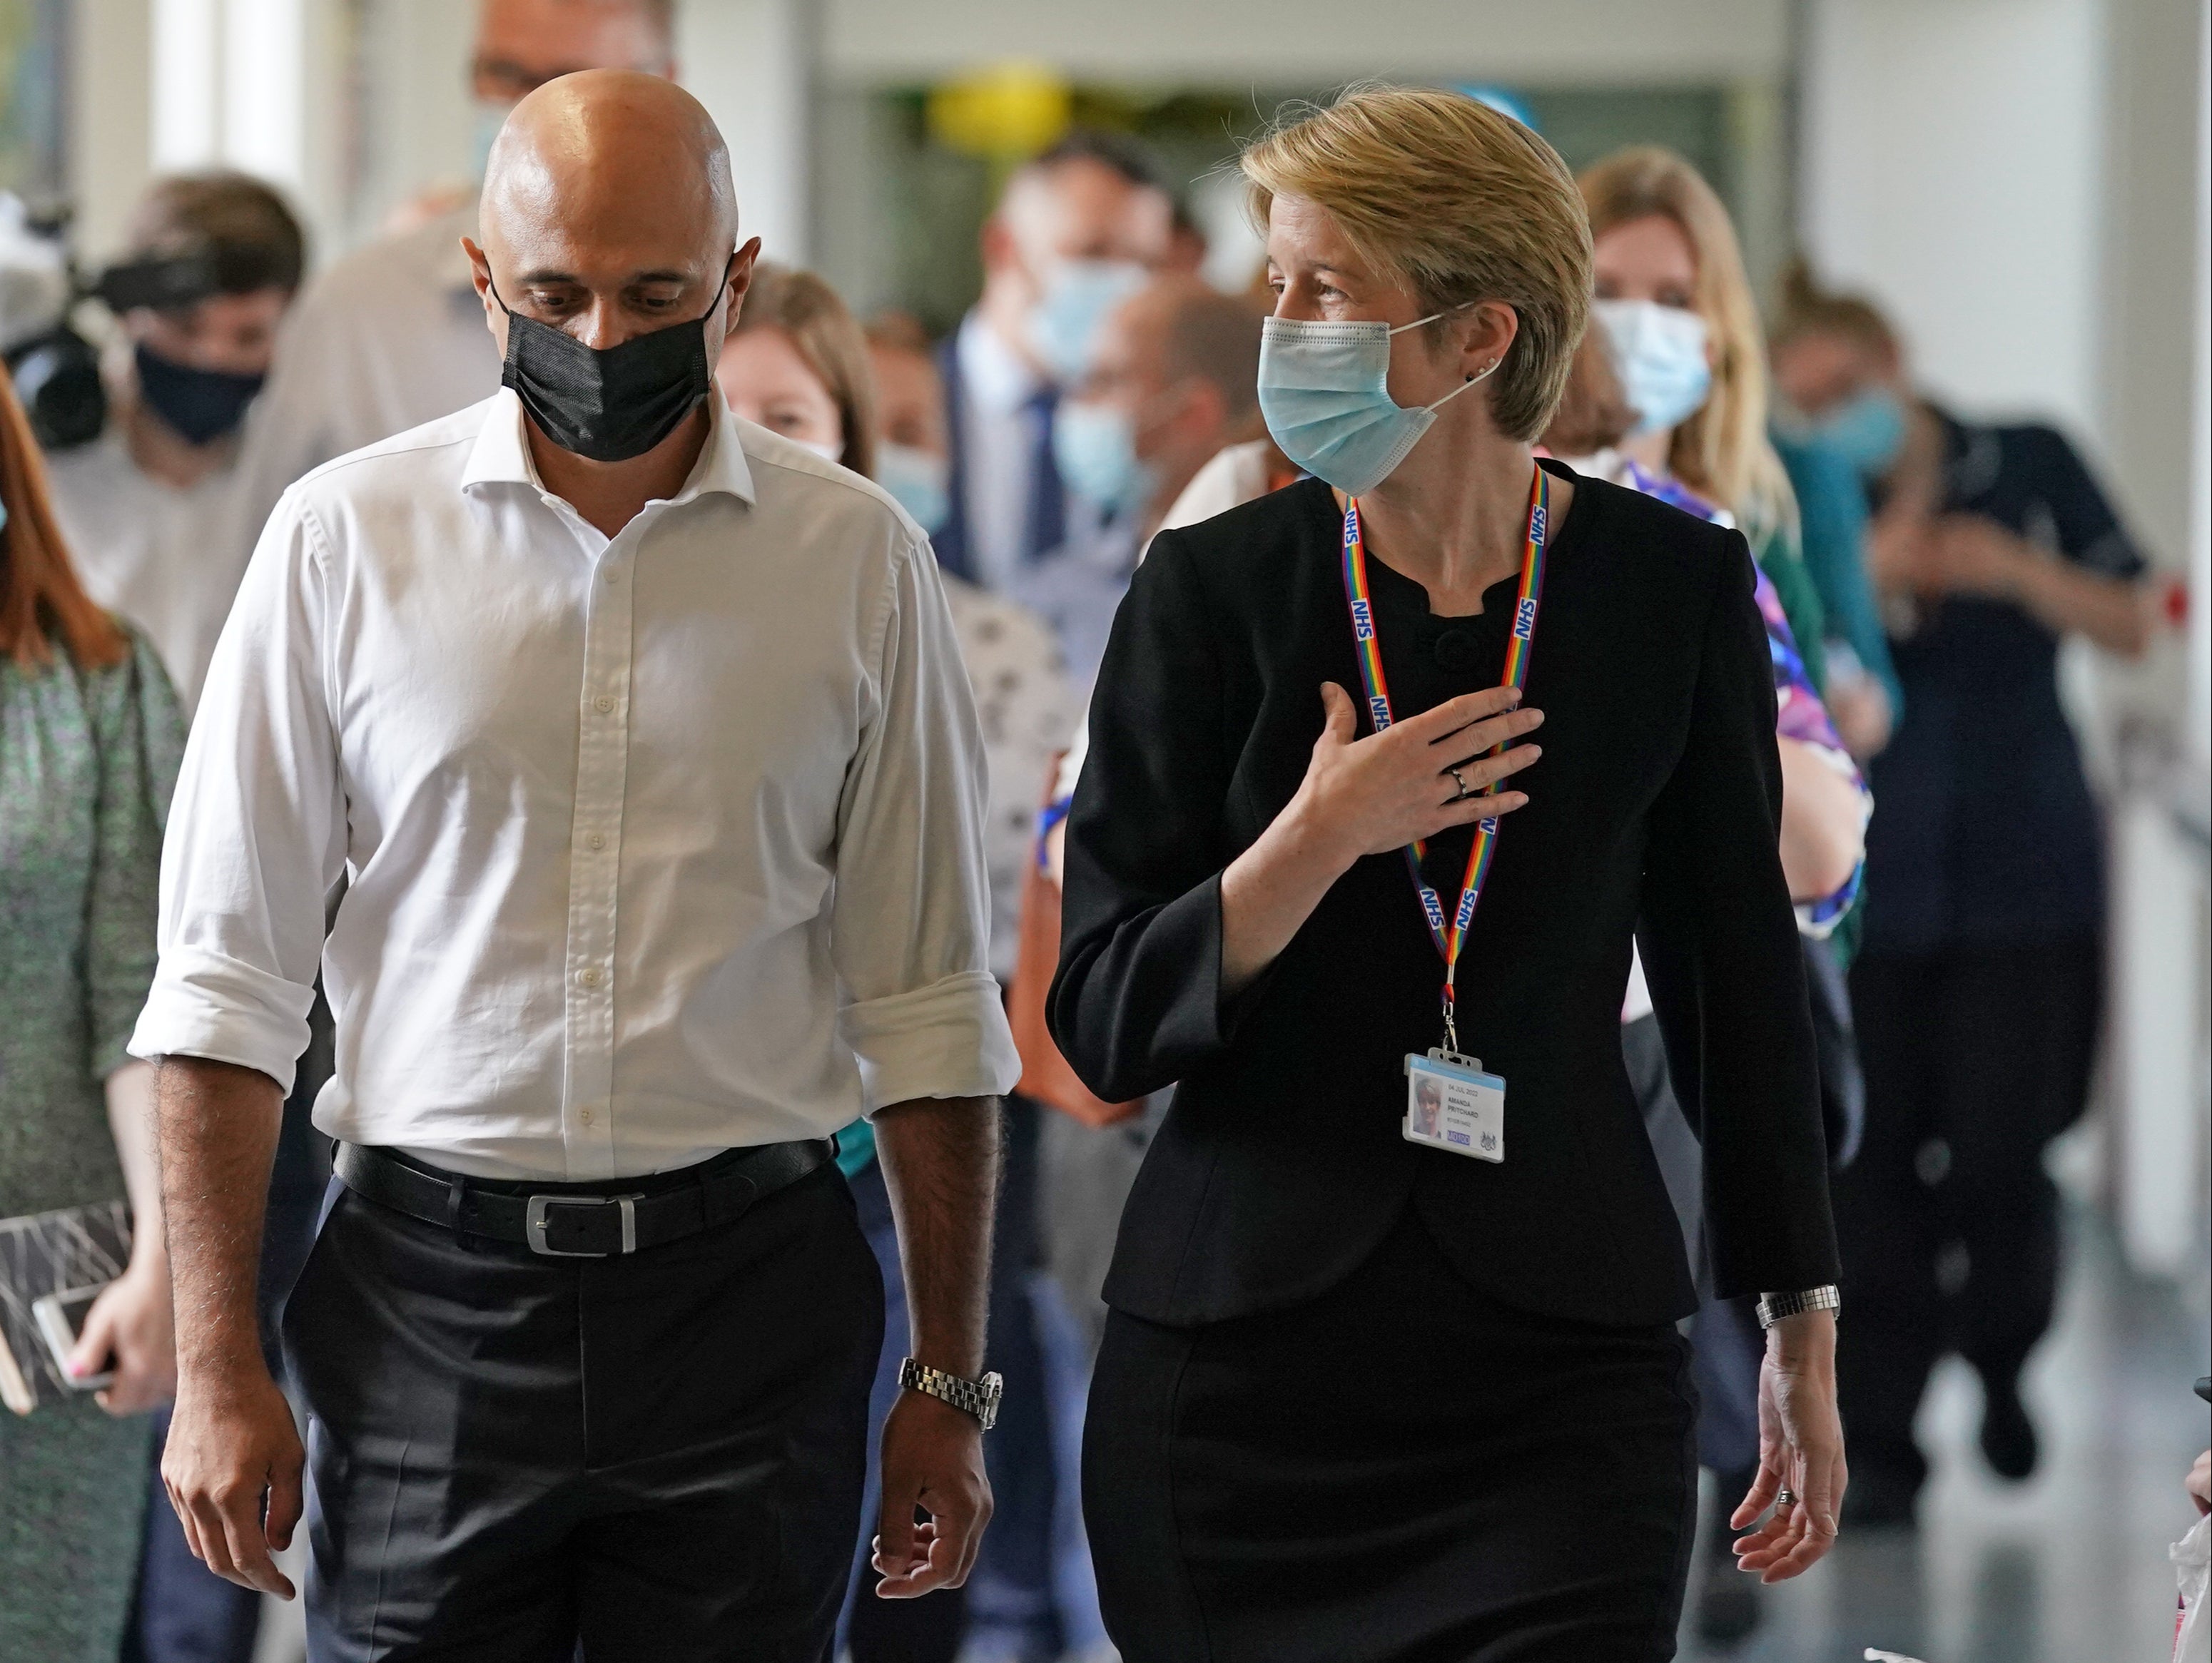 NHS England chief Amanda Pritchard on a visit to an NHS hospital earlier this month with health secretary Sajid Javid